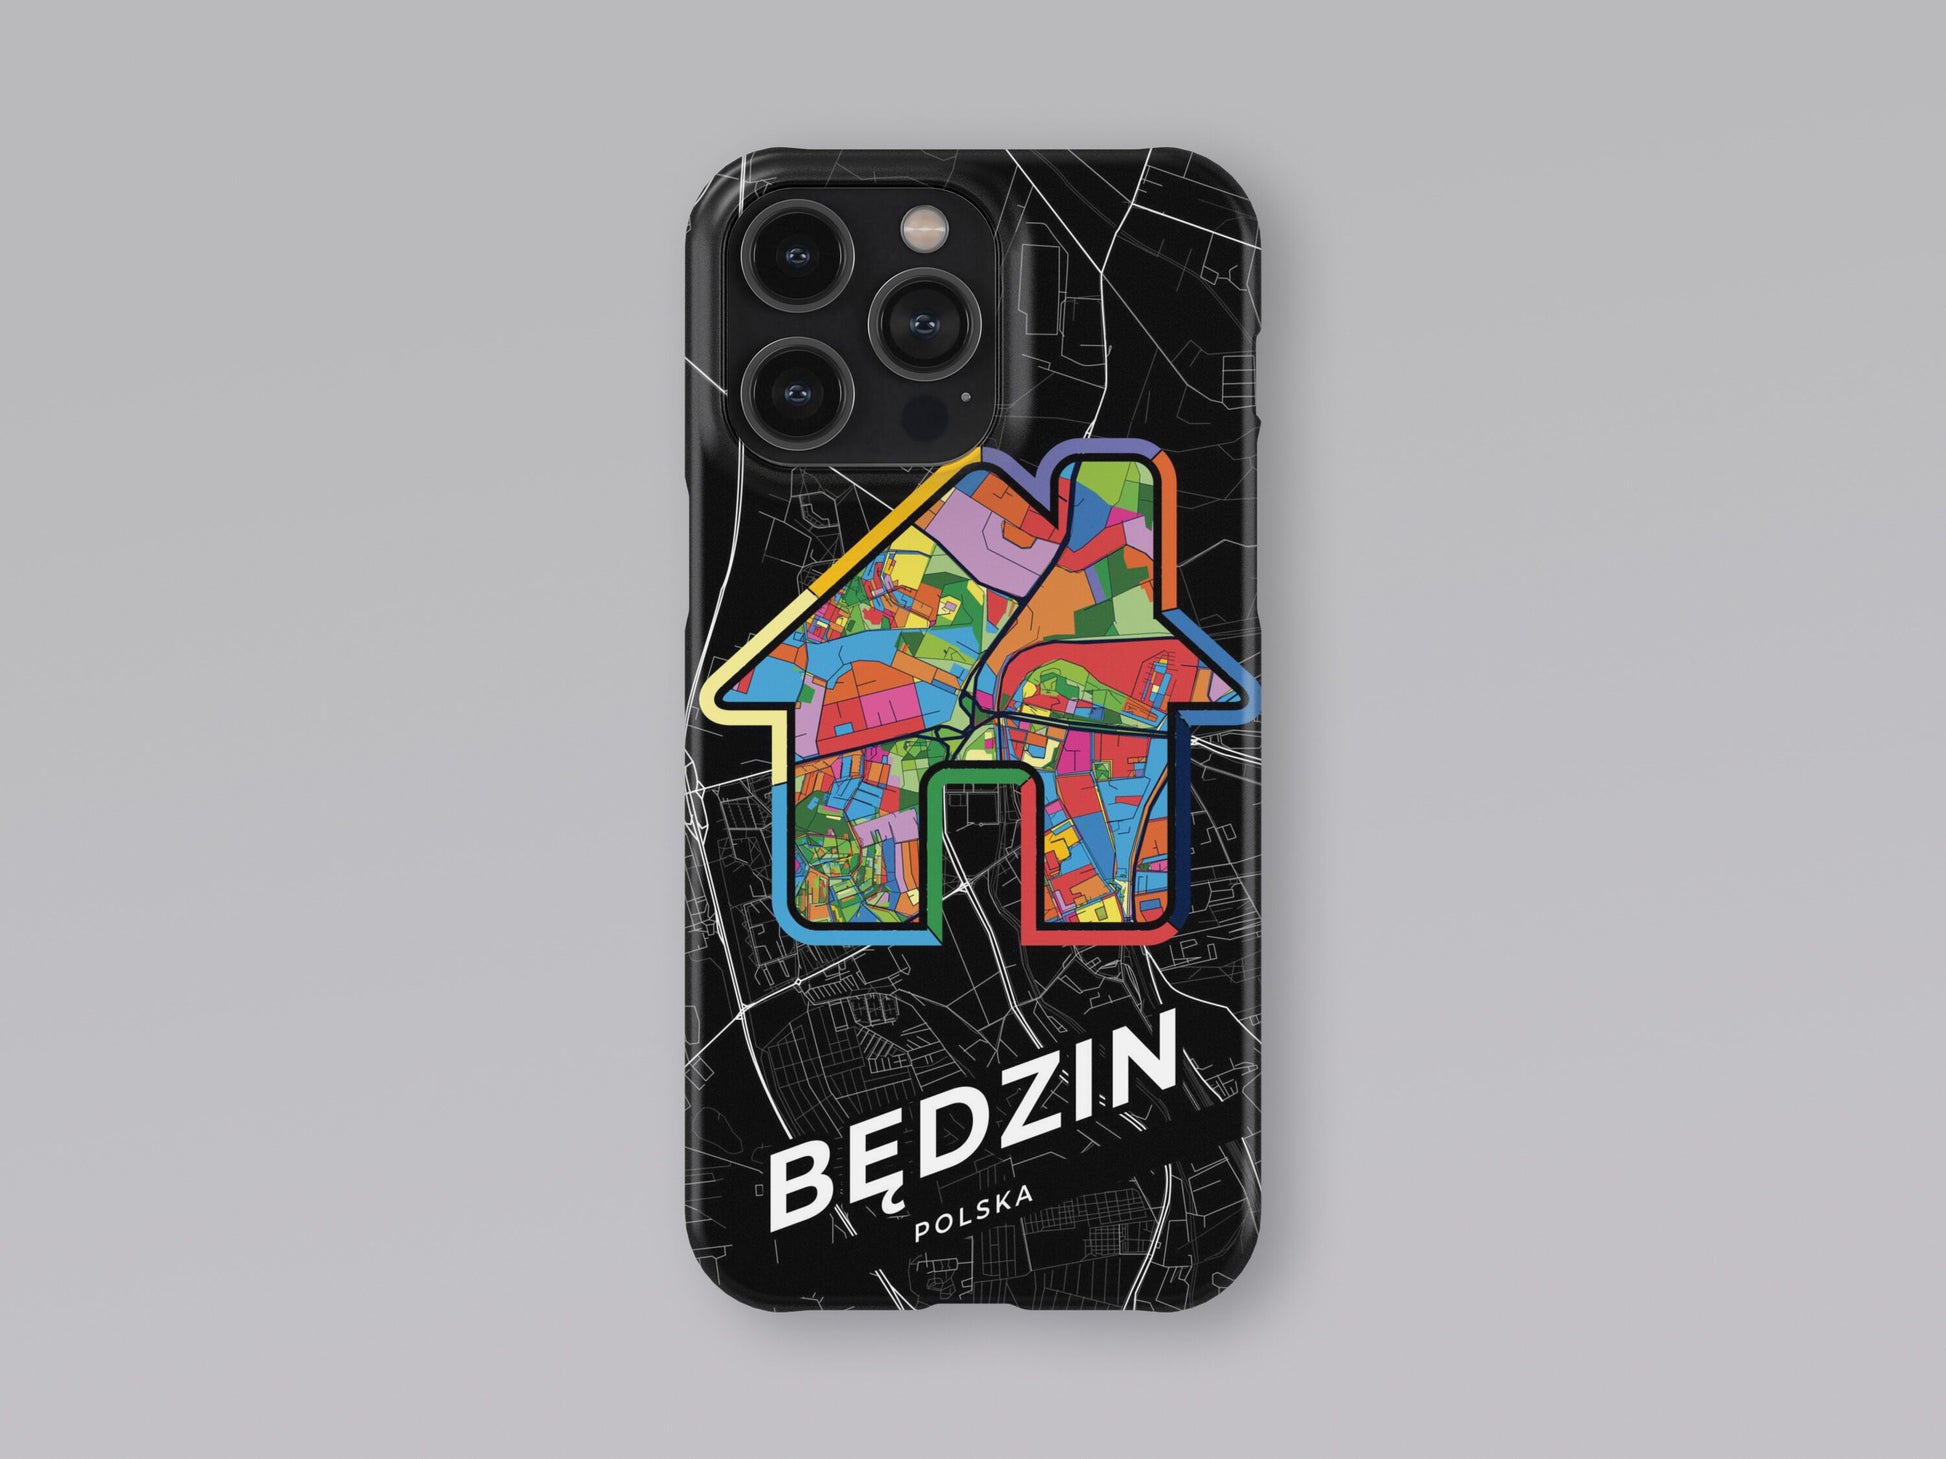 Będzin Poland slim phone case with colorful icon. Birthday, wedding or housewarming gift. Couple match cases. 3